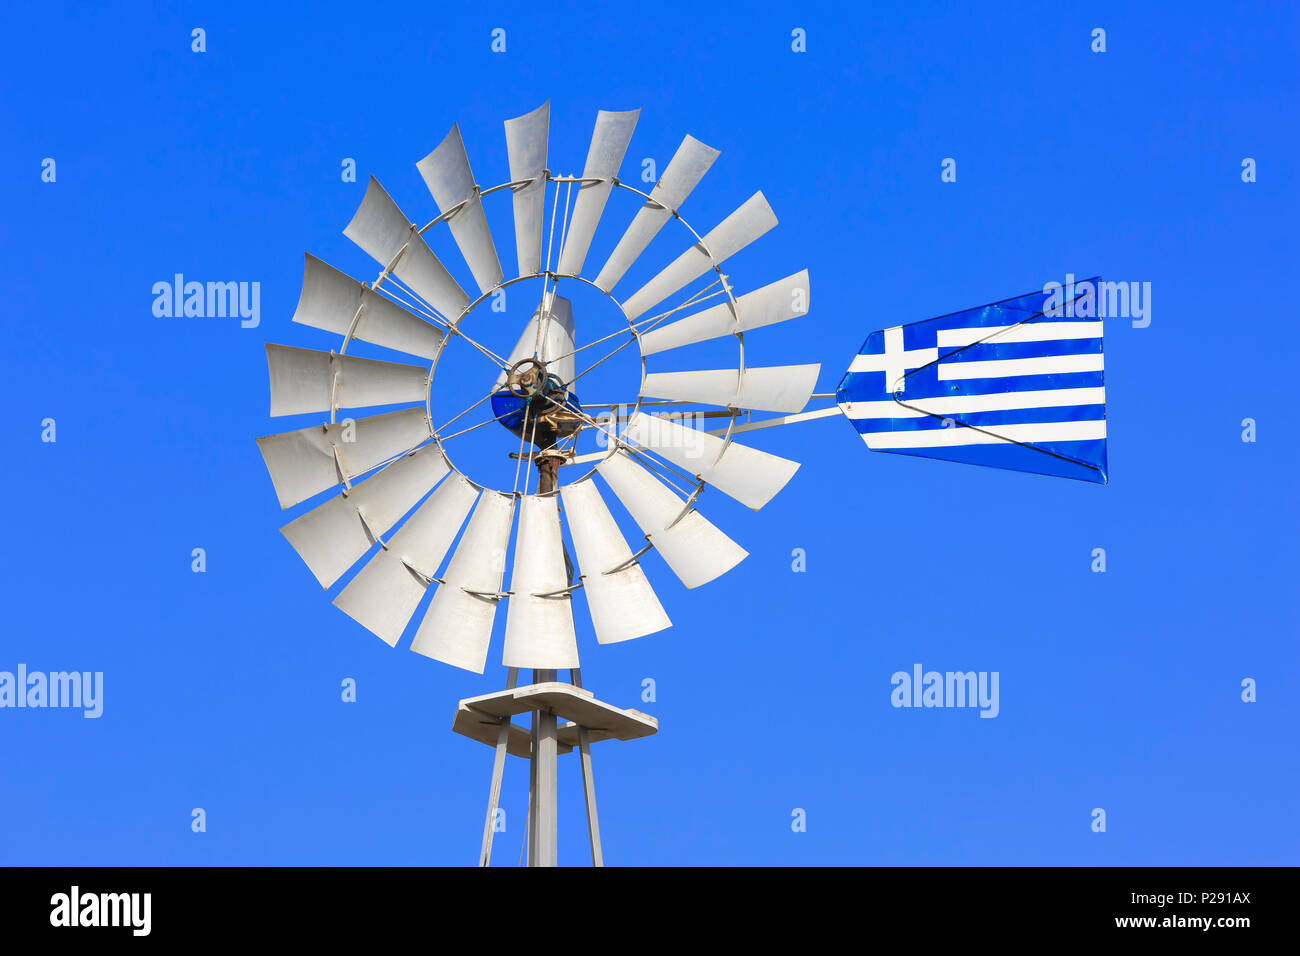 A windpump (type of windmill) with the Greek flag in Protaras, Cyprus Stock Photo